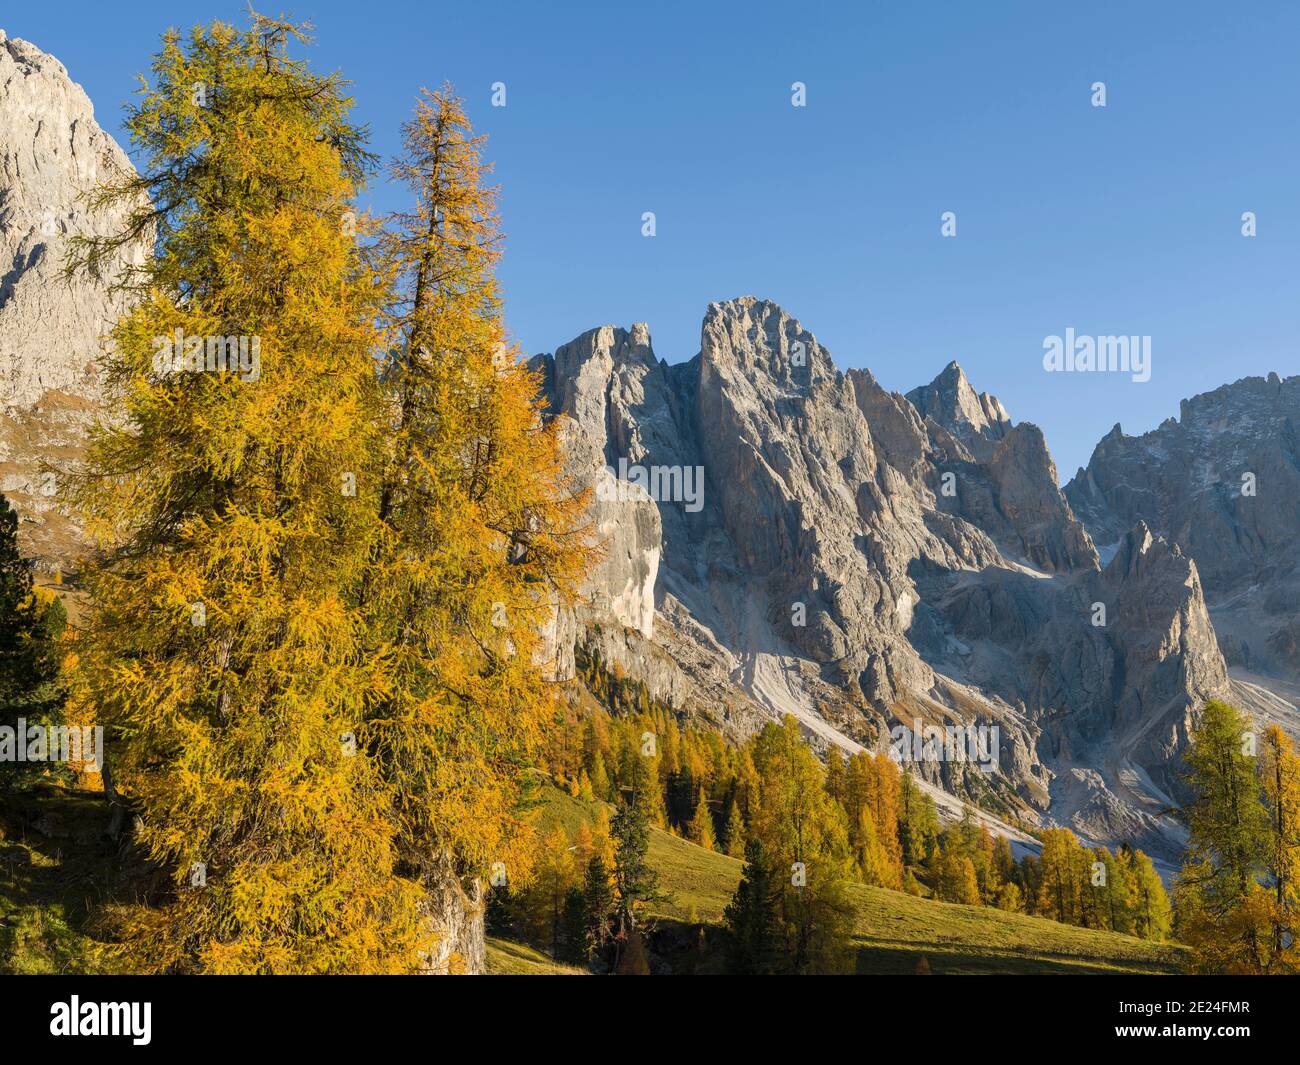 Peaks towering over  Val Venegia.  Pala mountain range (Pale di San Martino) in the dolomites of Trentino. Pala is part of the UNESCO world heritage D Stock Photo